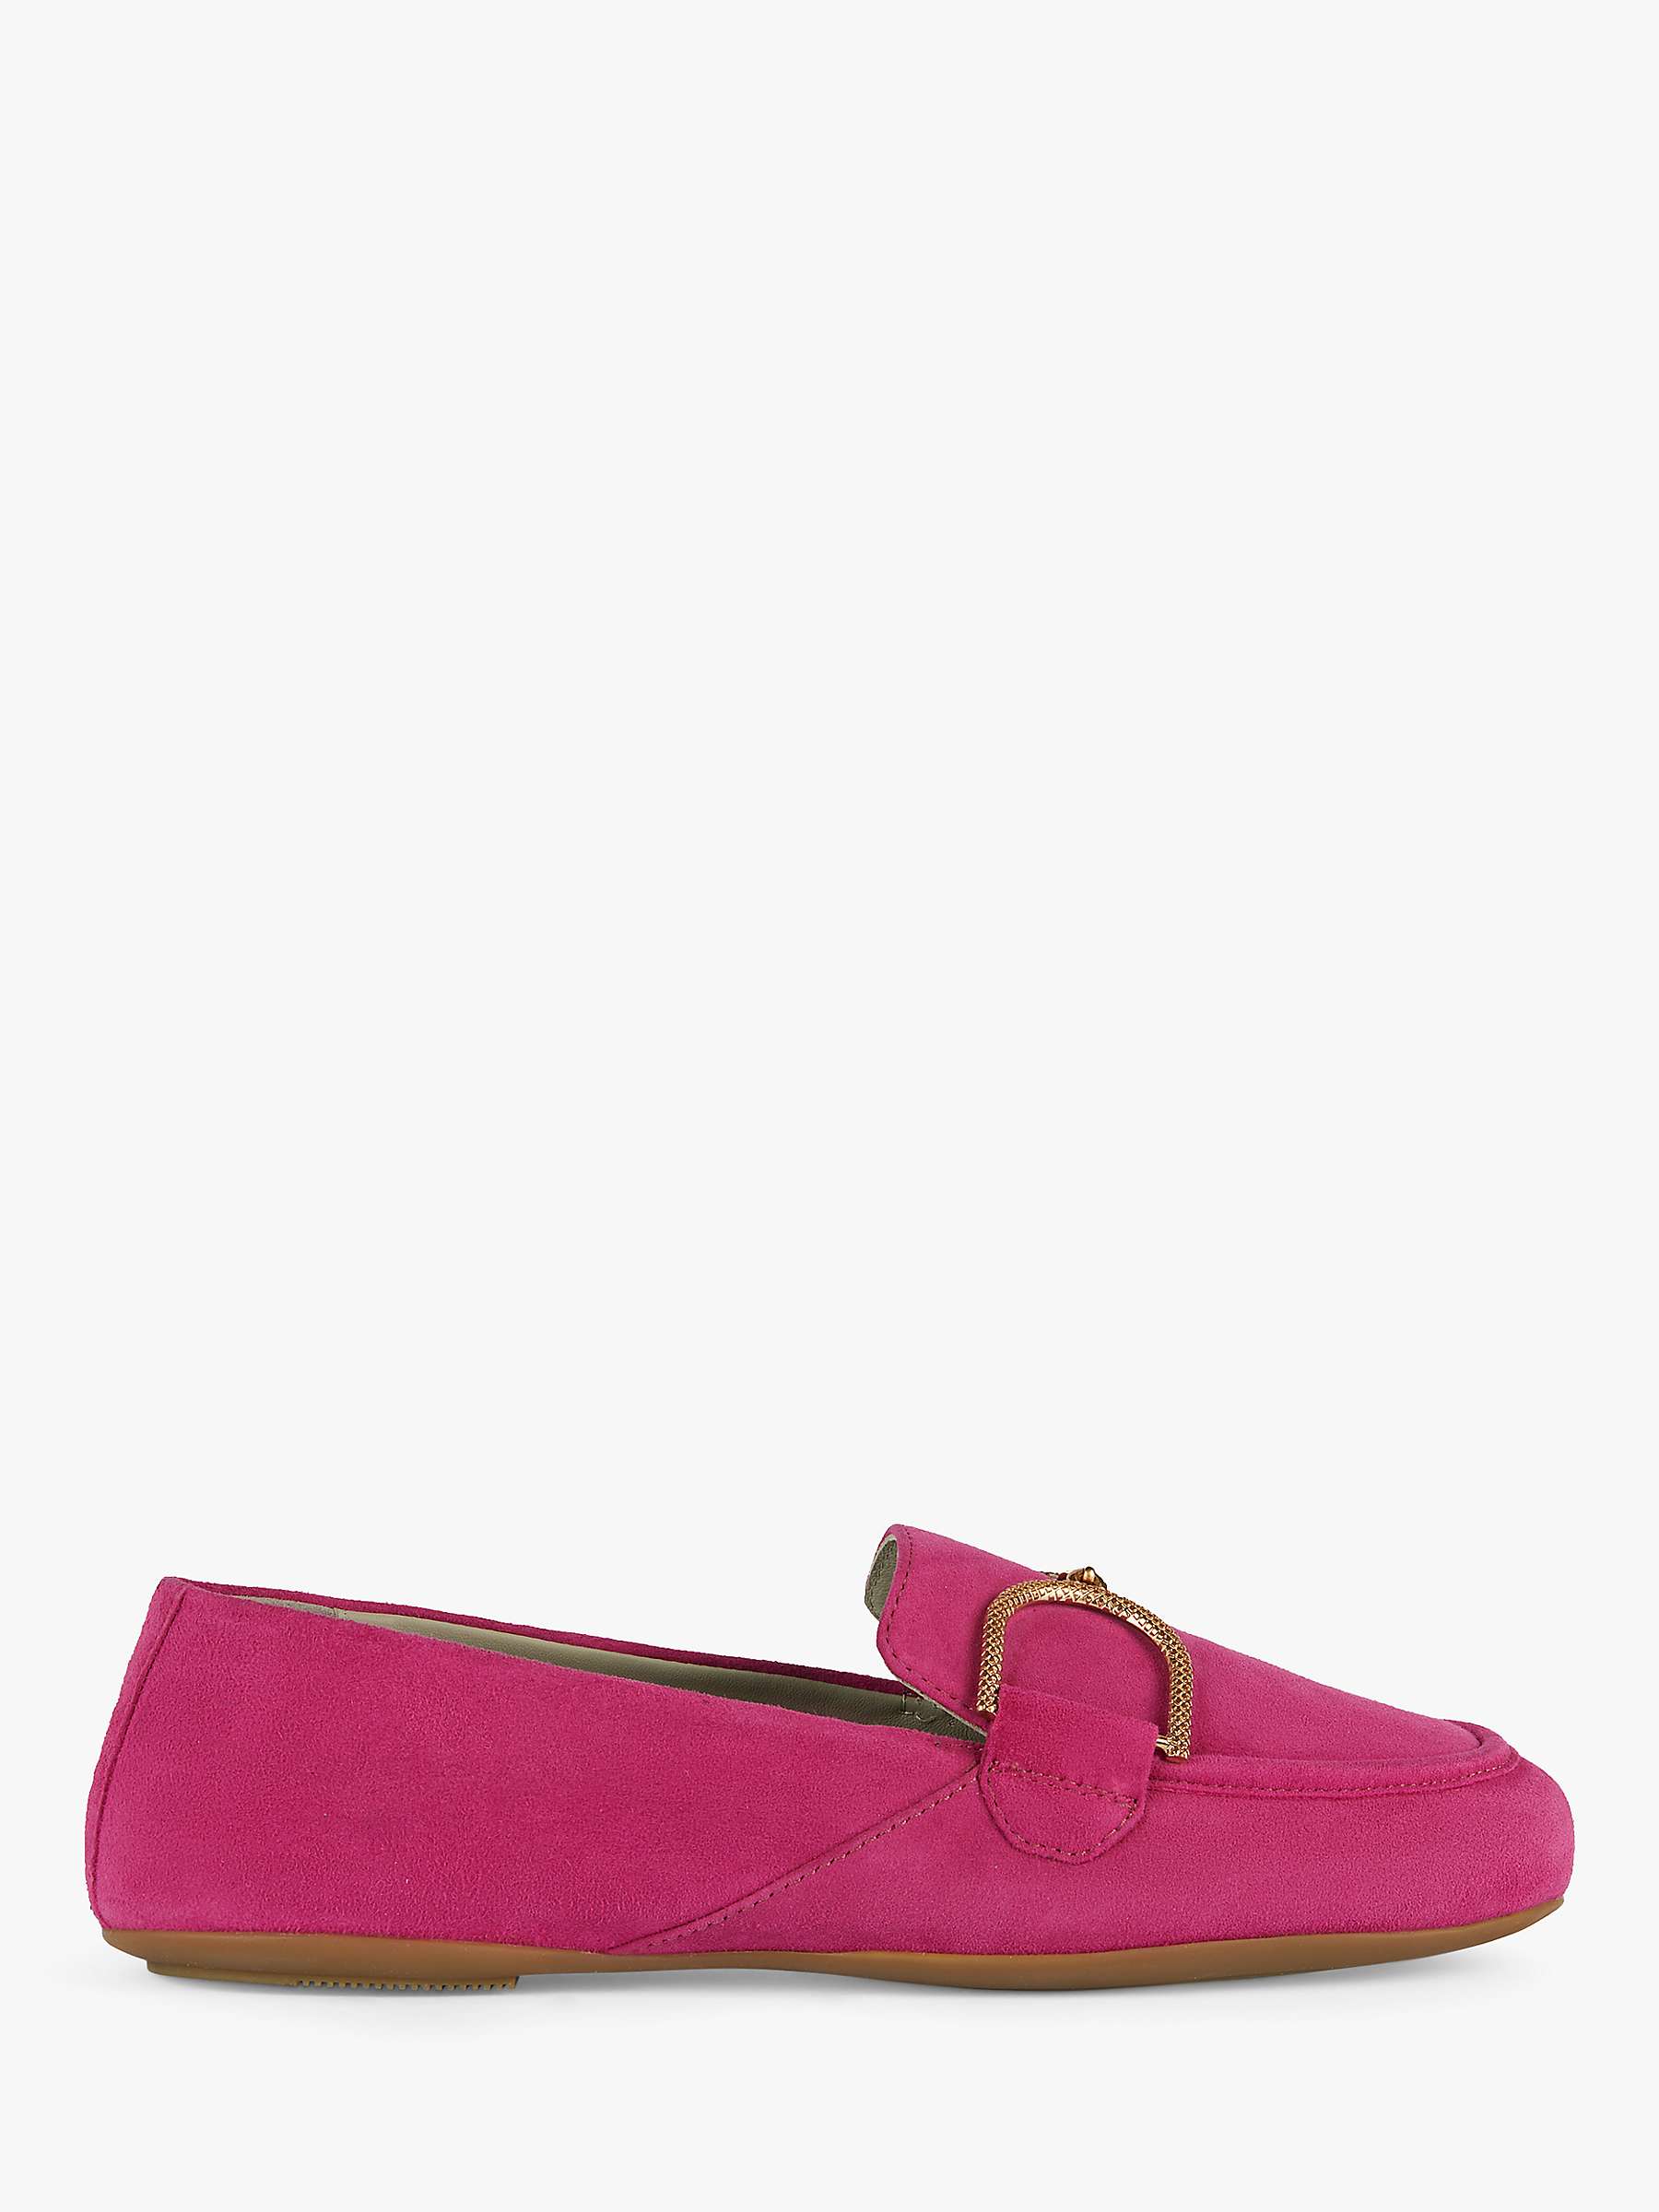 Buy Geox Palmaria Suede City Loafers Online at johnlewis.com